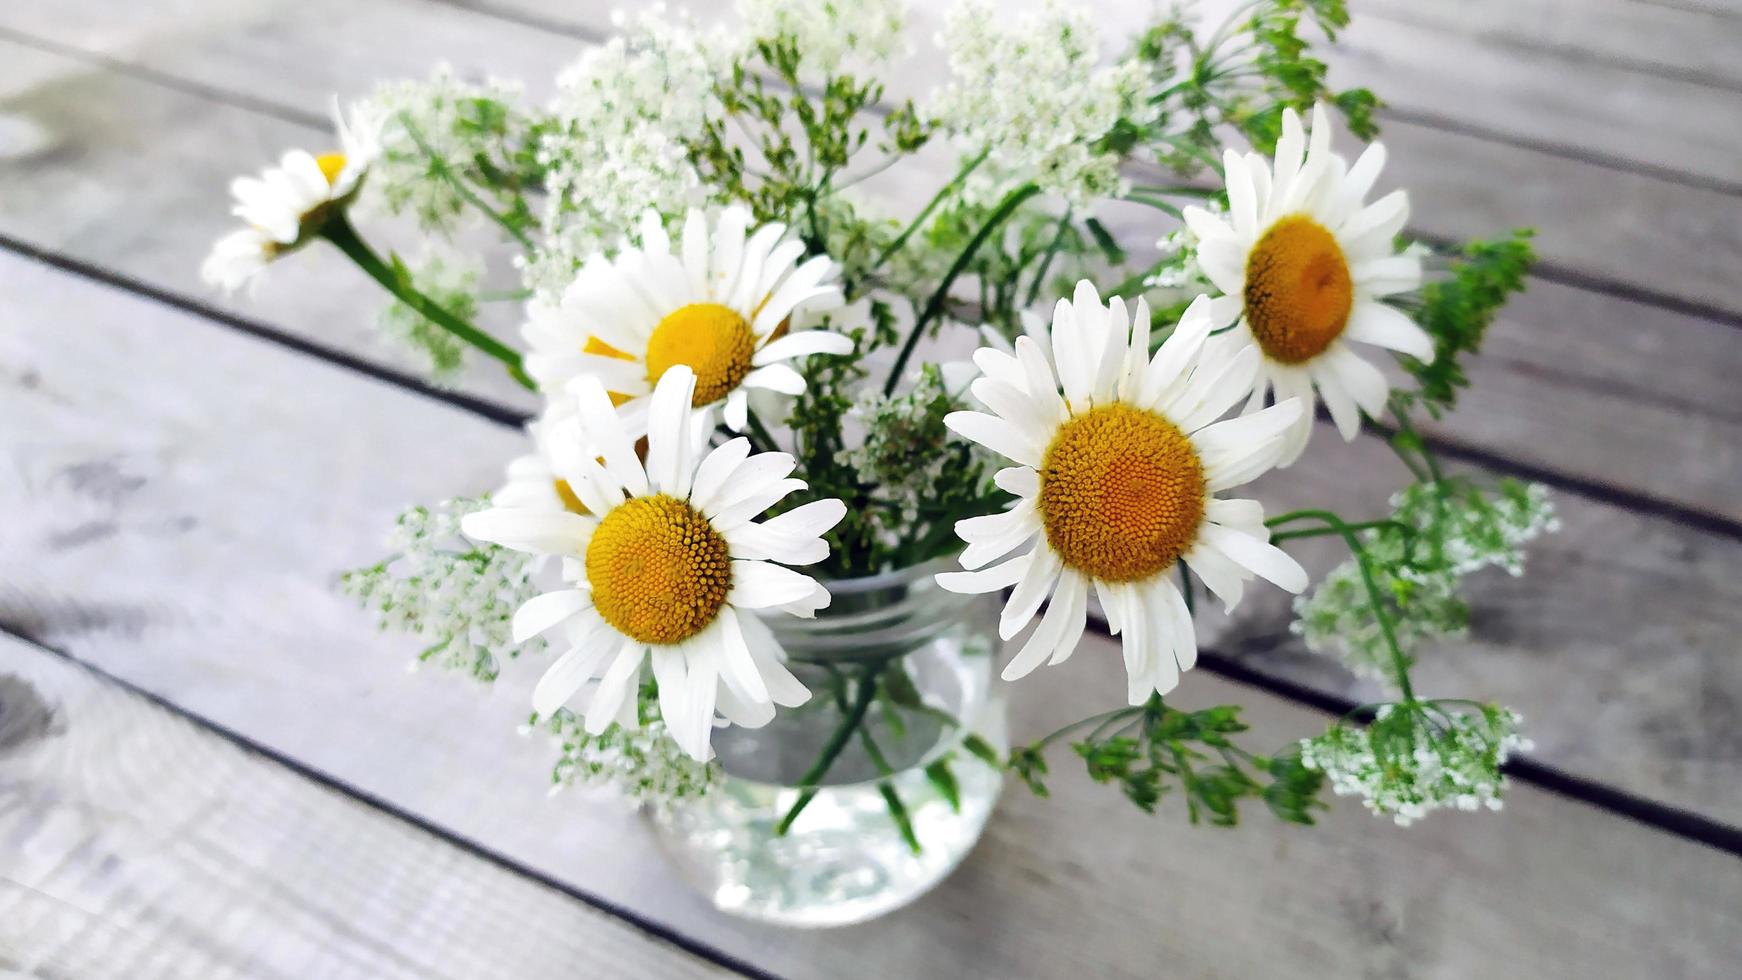 A bouquet of daisies in a glass vase. White daisies in a jar close-up photo